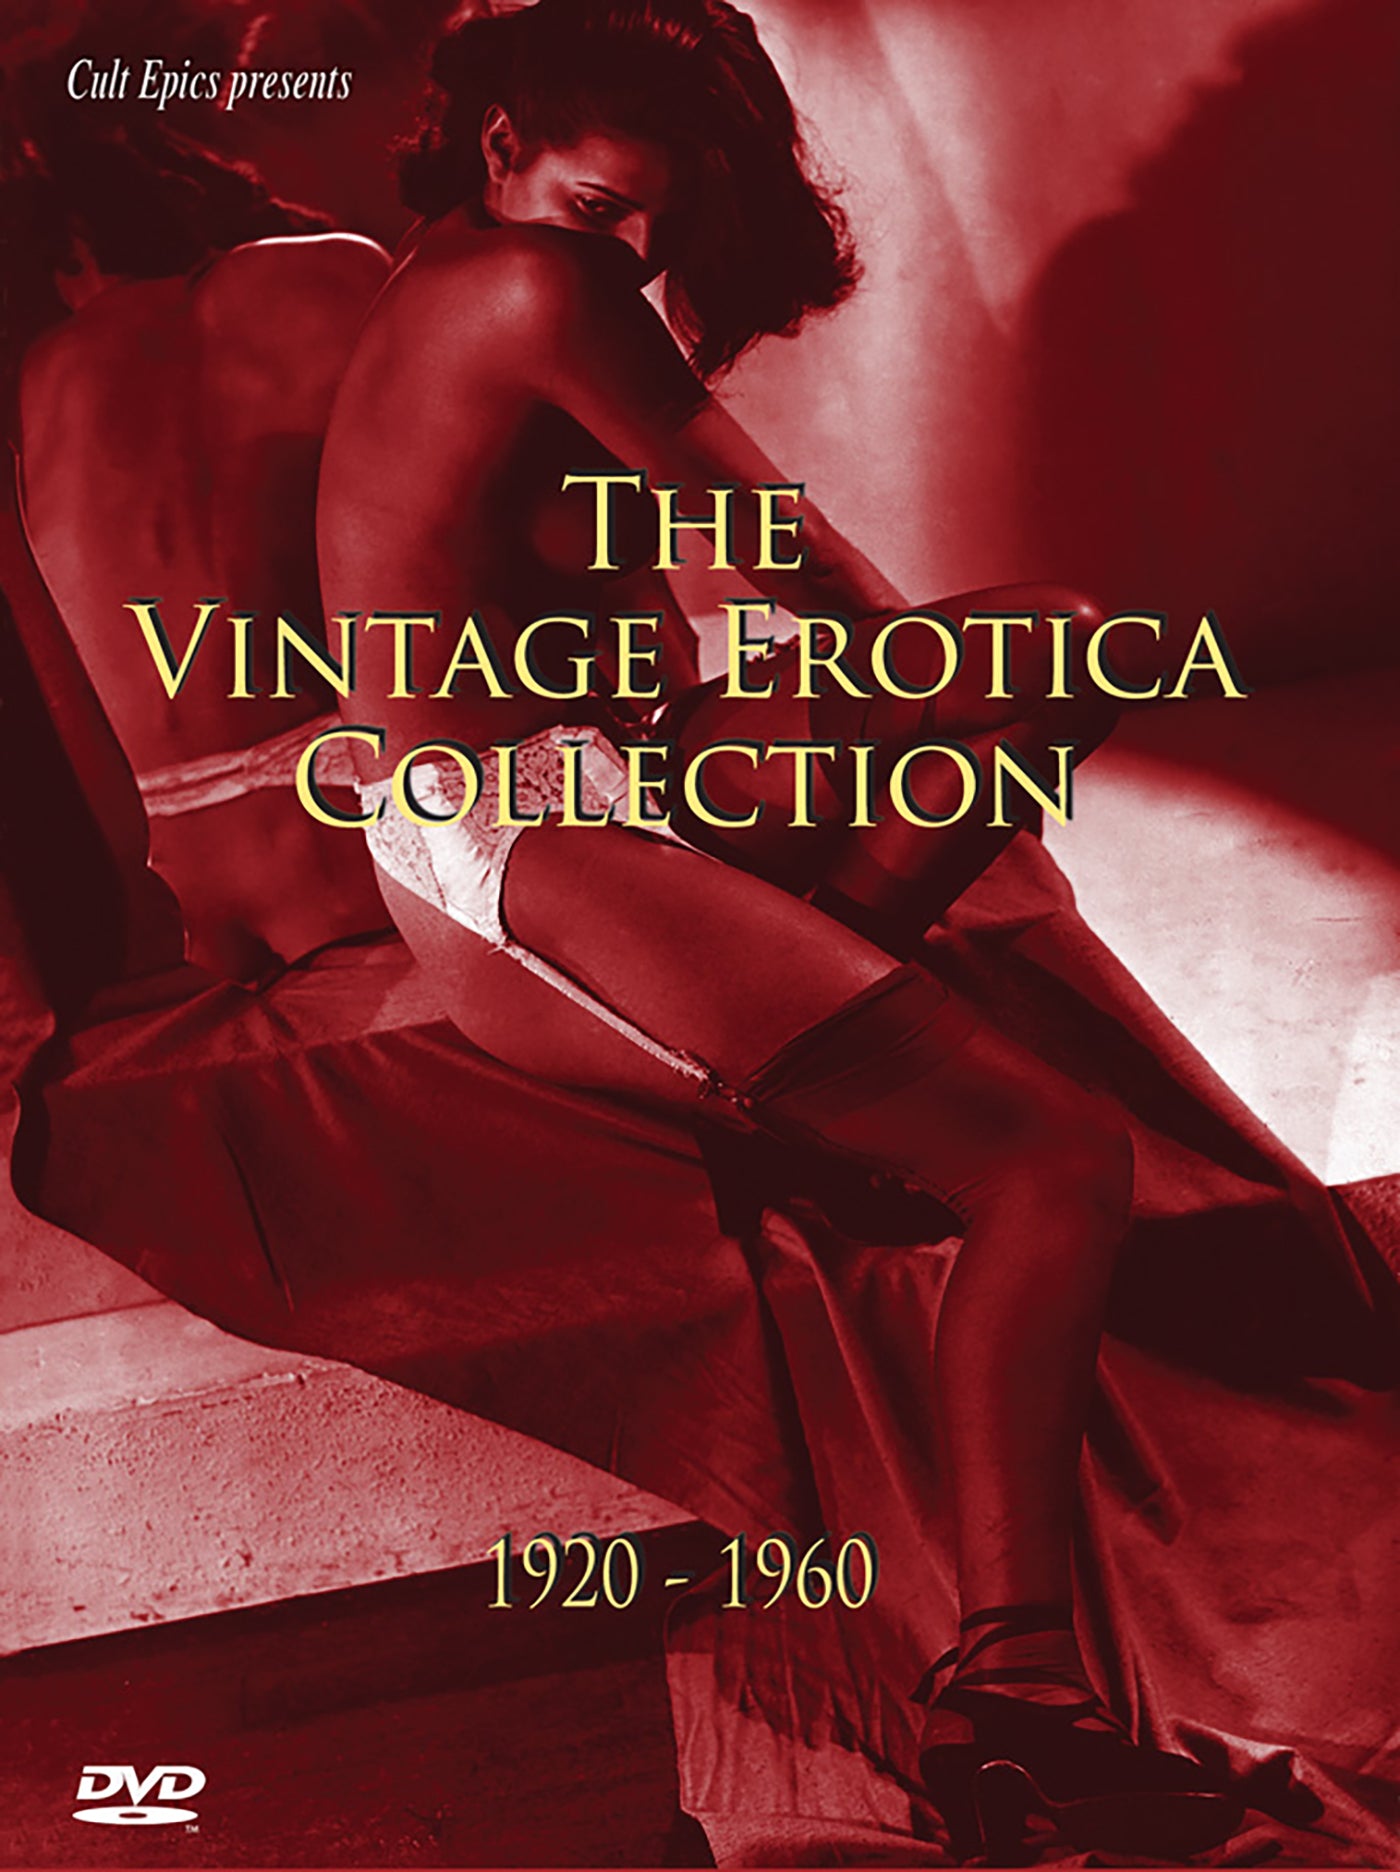 THE VINTAGE EROTICA COLLECTION: 1920-1960 DVD